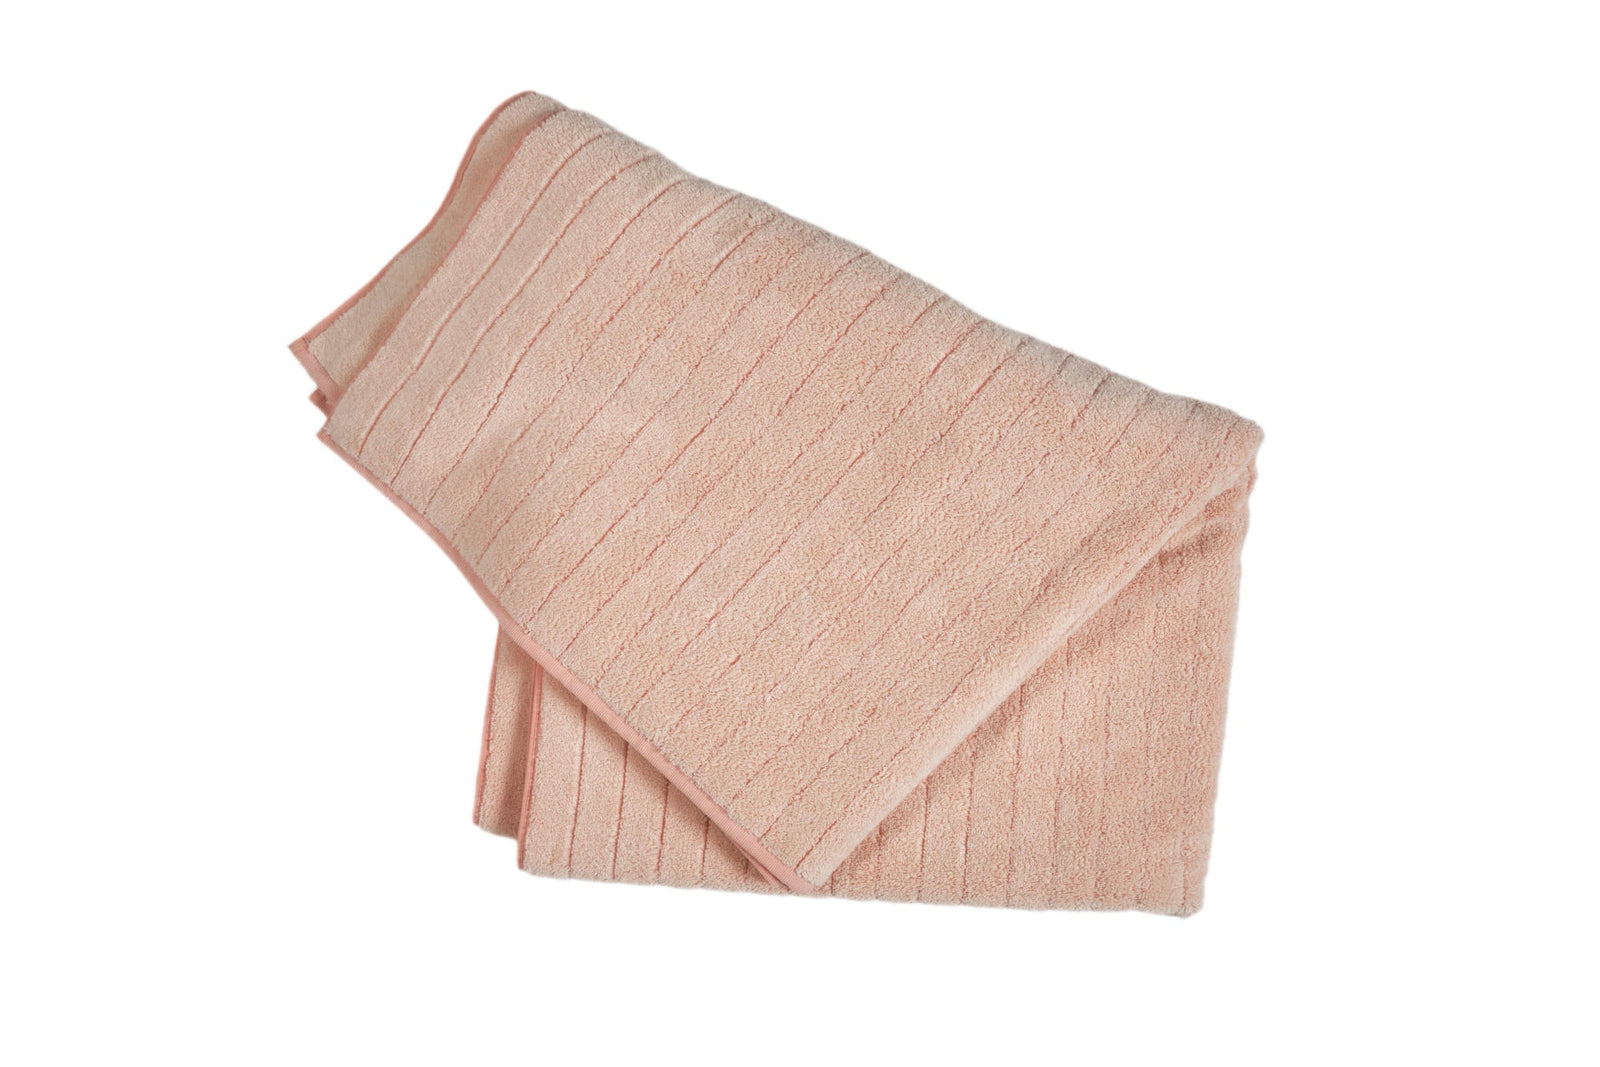 The Company Store Company Cotton Coral Solid Turkish Cotton Bath Sheet Pink